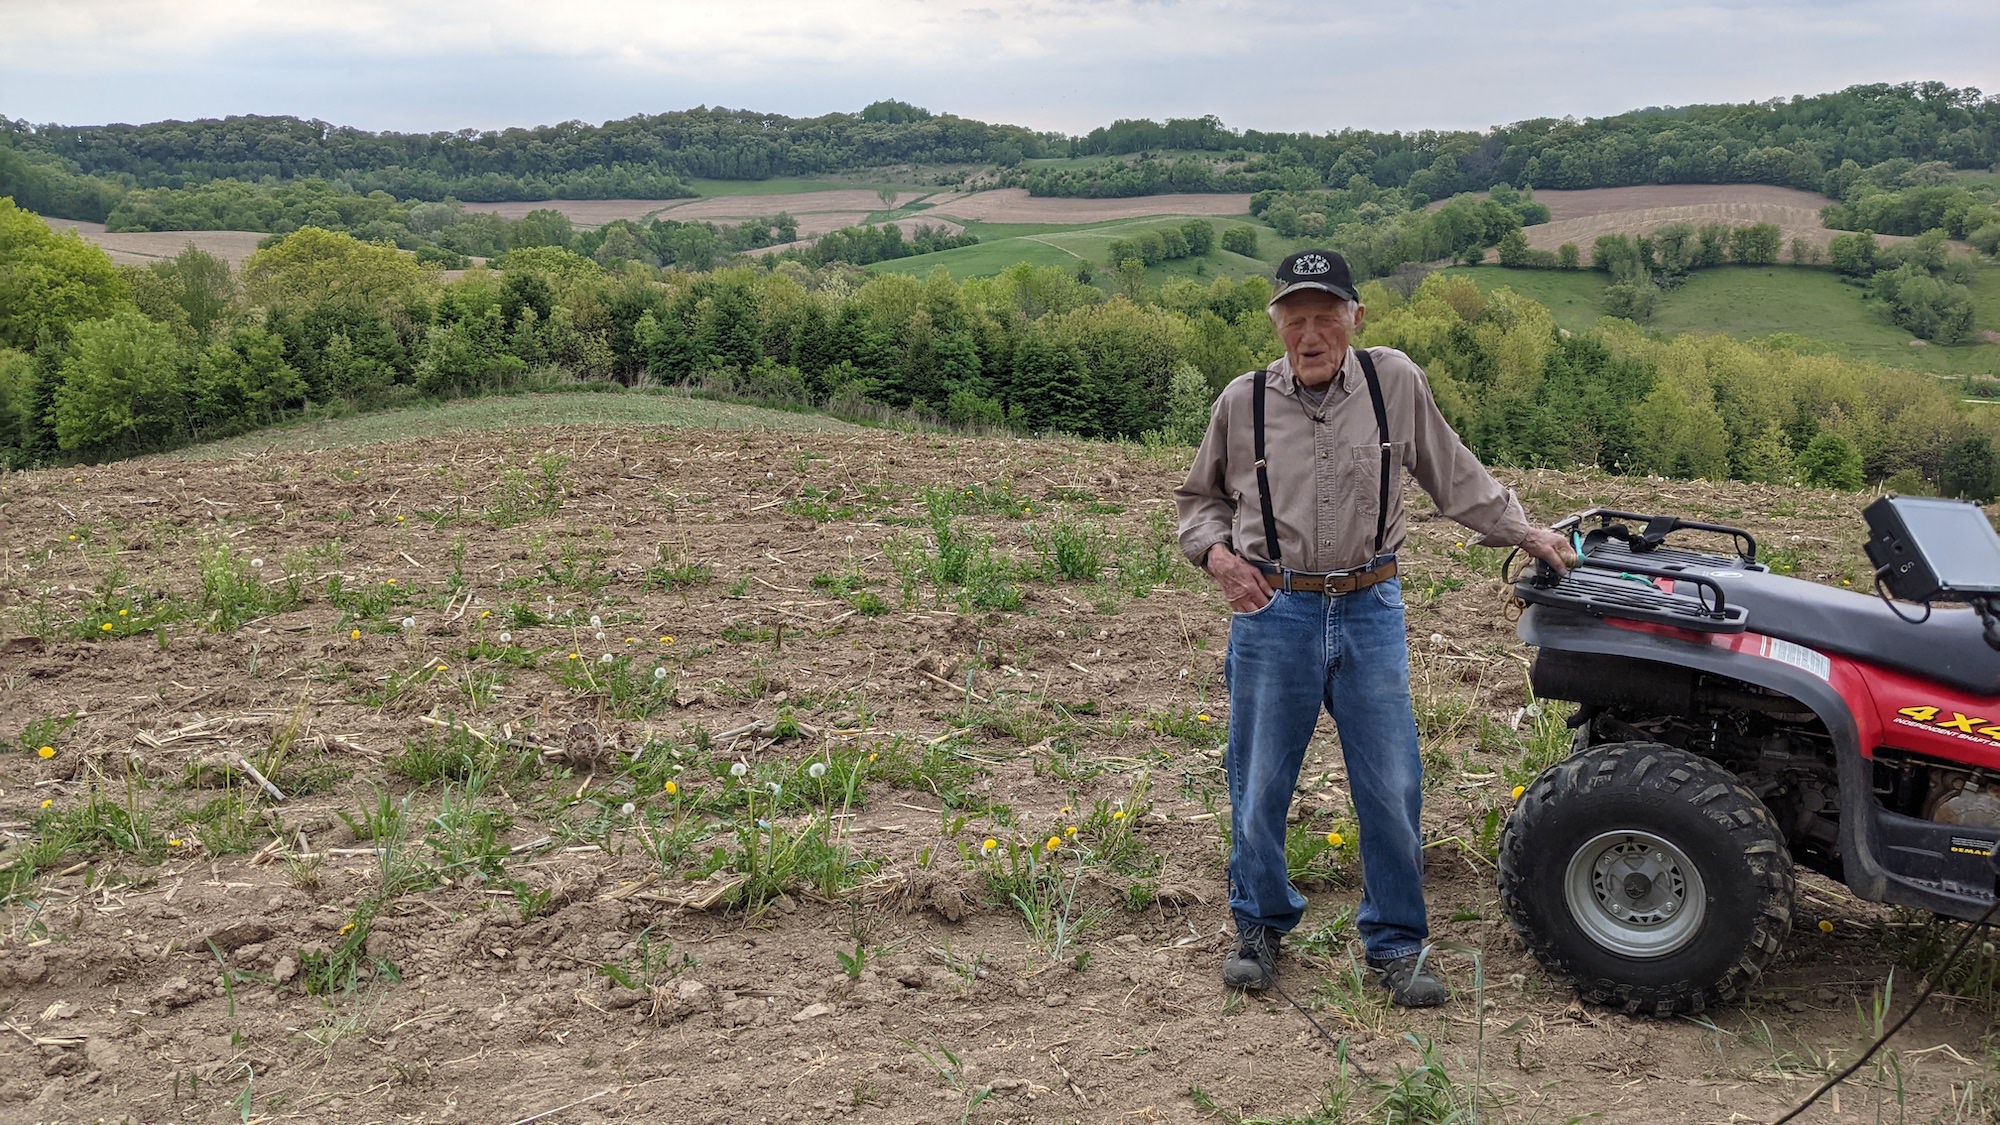 A farmer out in the field with his ATV four wheeler.